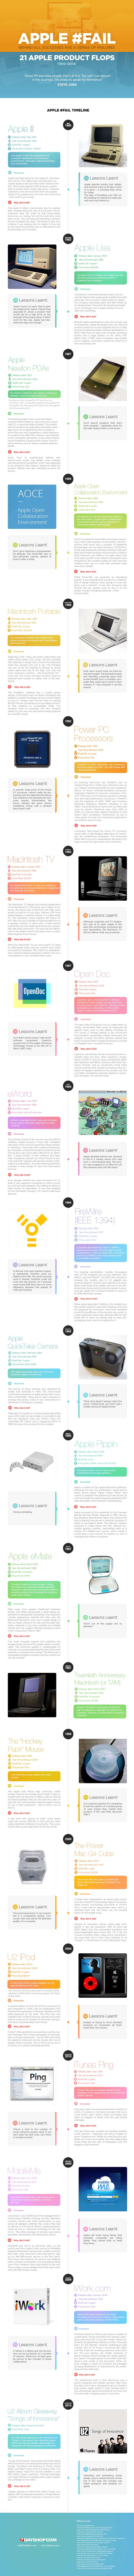 APPLE #FAIL - 21 Apple Product Flops [INFOGRAPHIC]